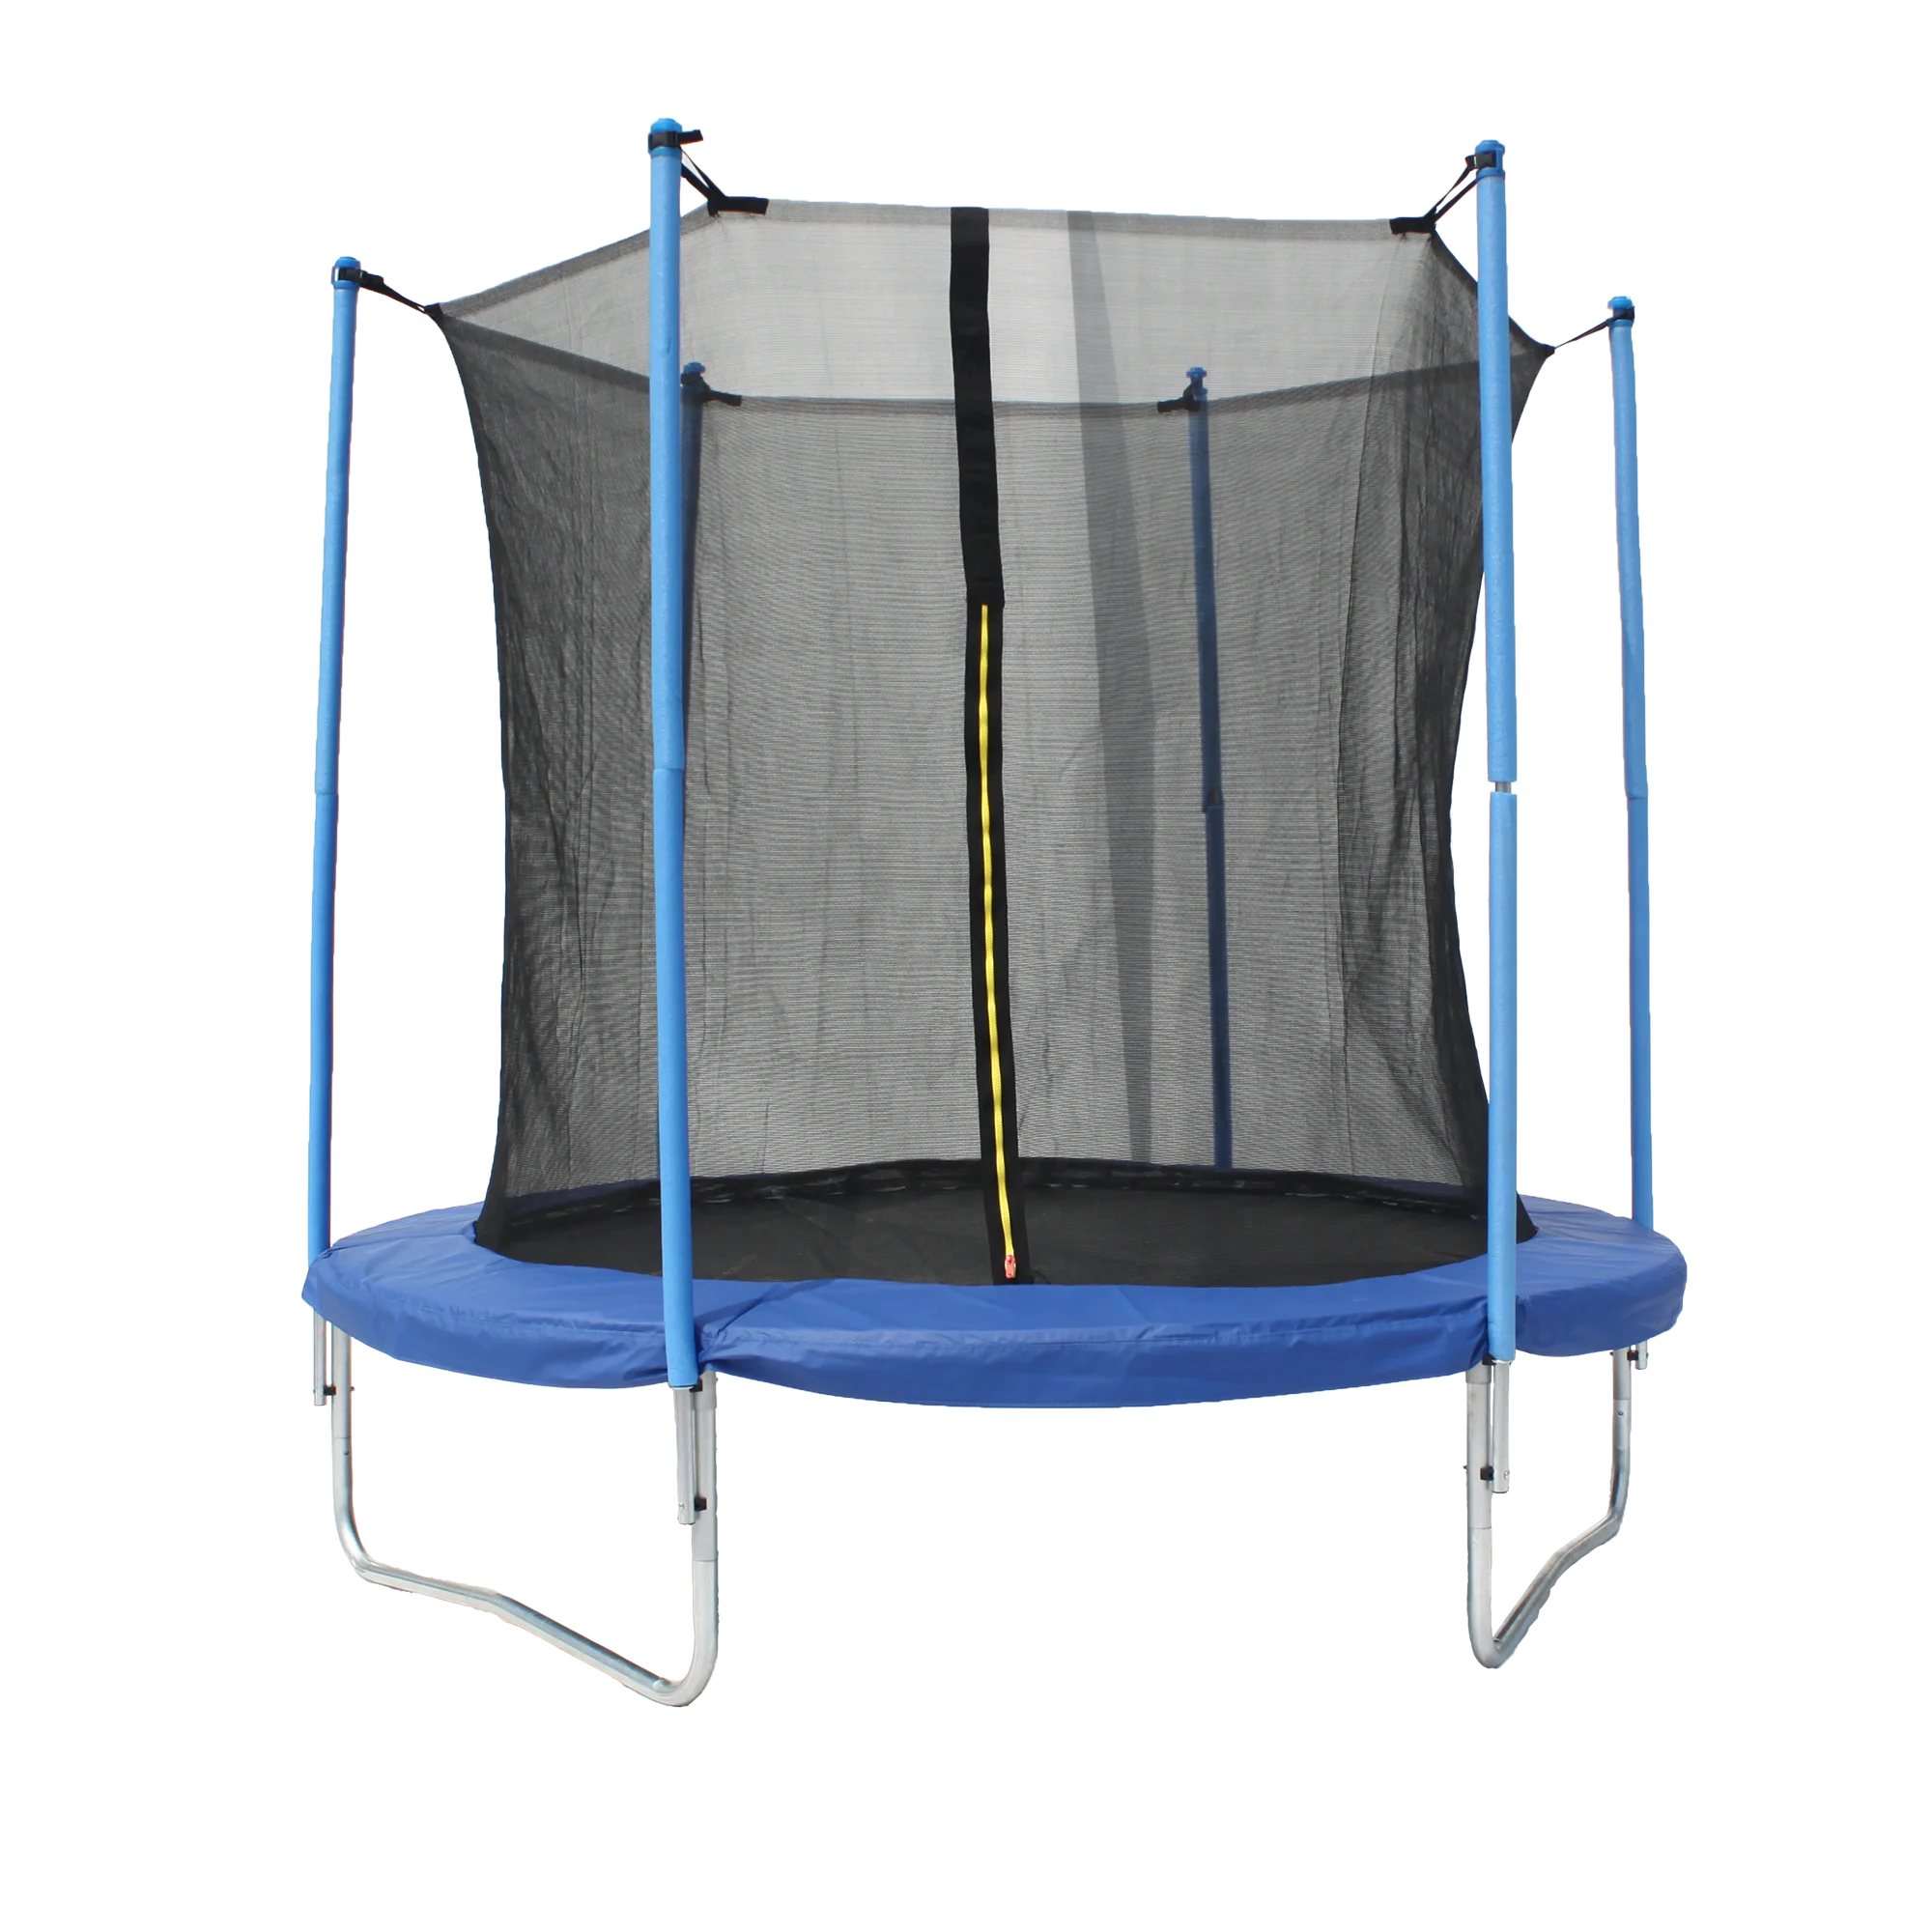 baoxiang 8ft trampoline with security net lights indoor jumping trampoline, View trampoline with security net, baoxiang Product Details from Jiangsu Baoxiang Sports Equipment Co., Ltd. on Alibaba.com